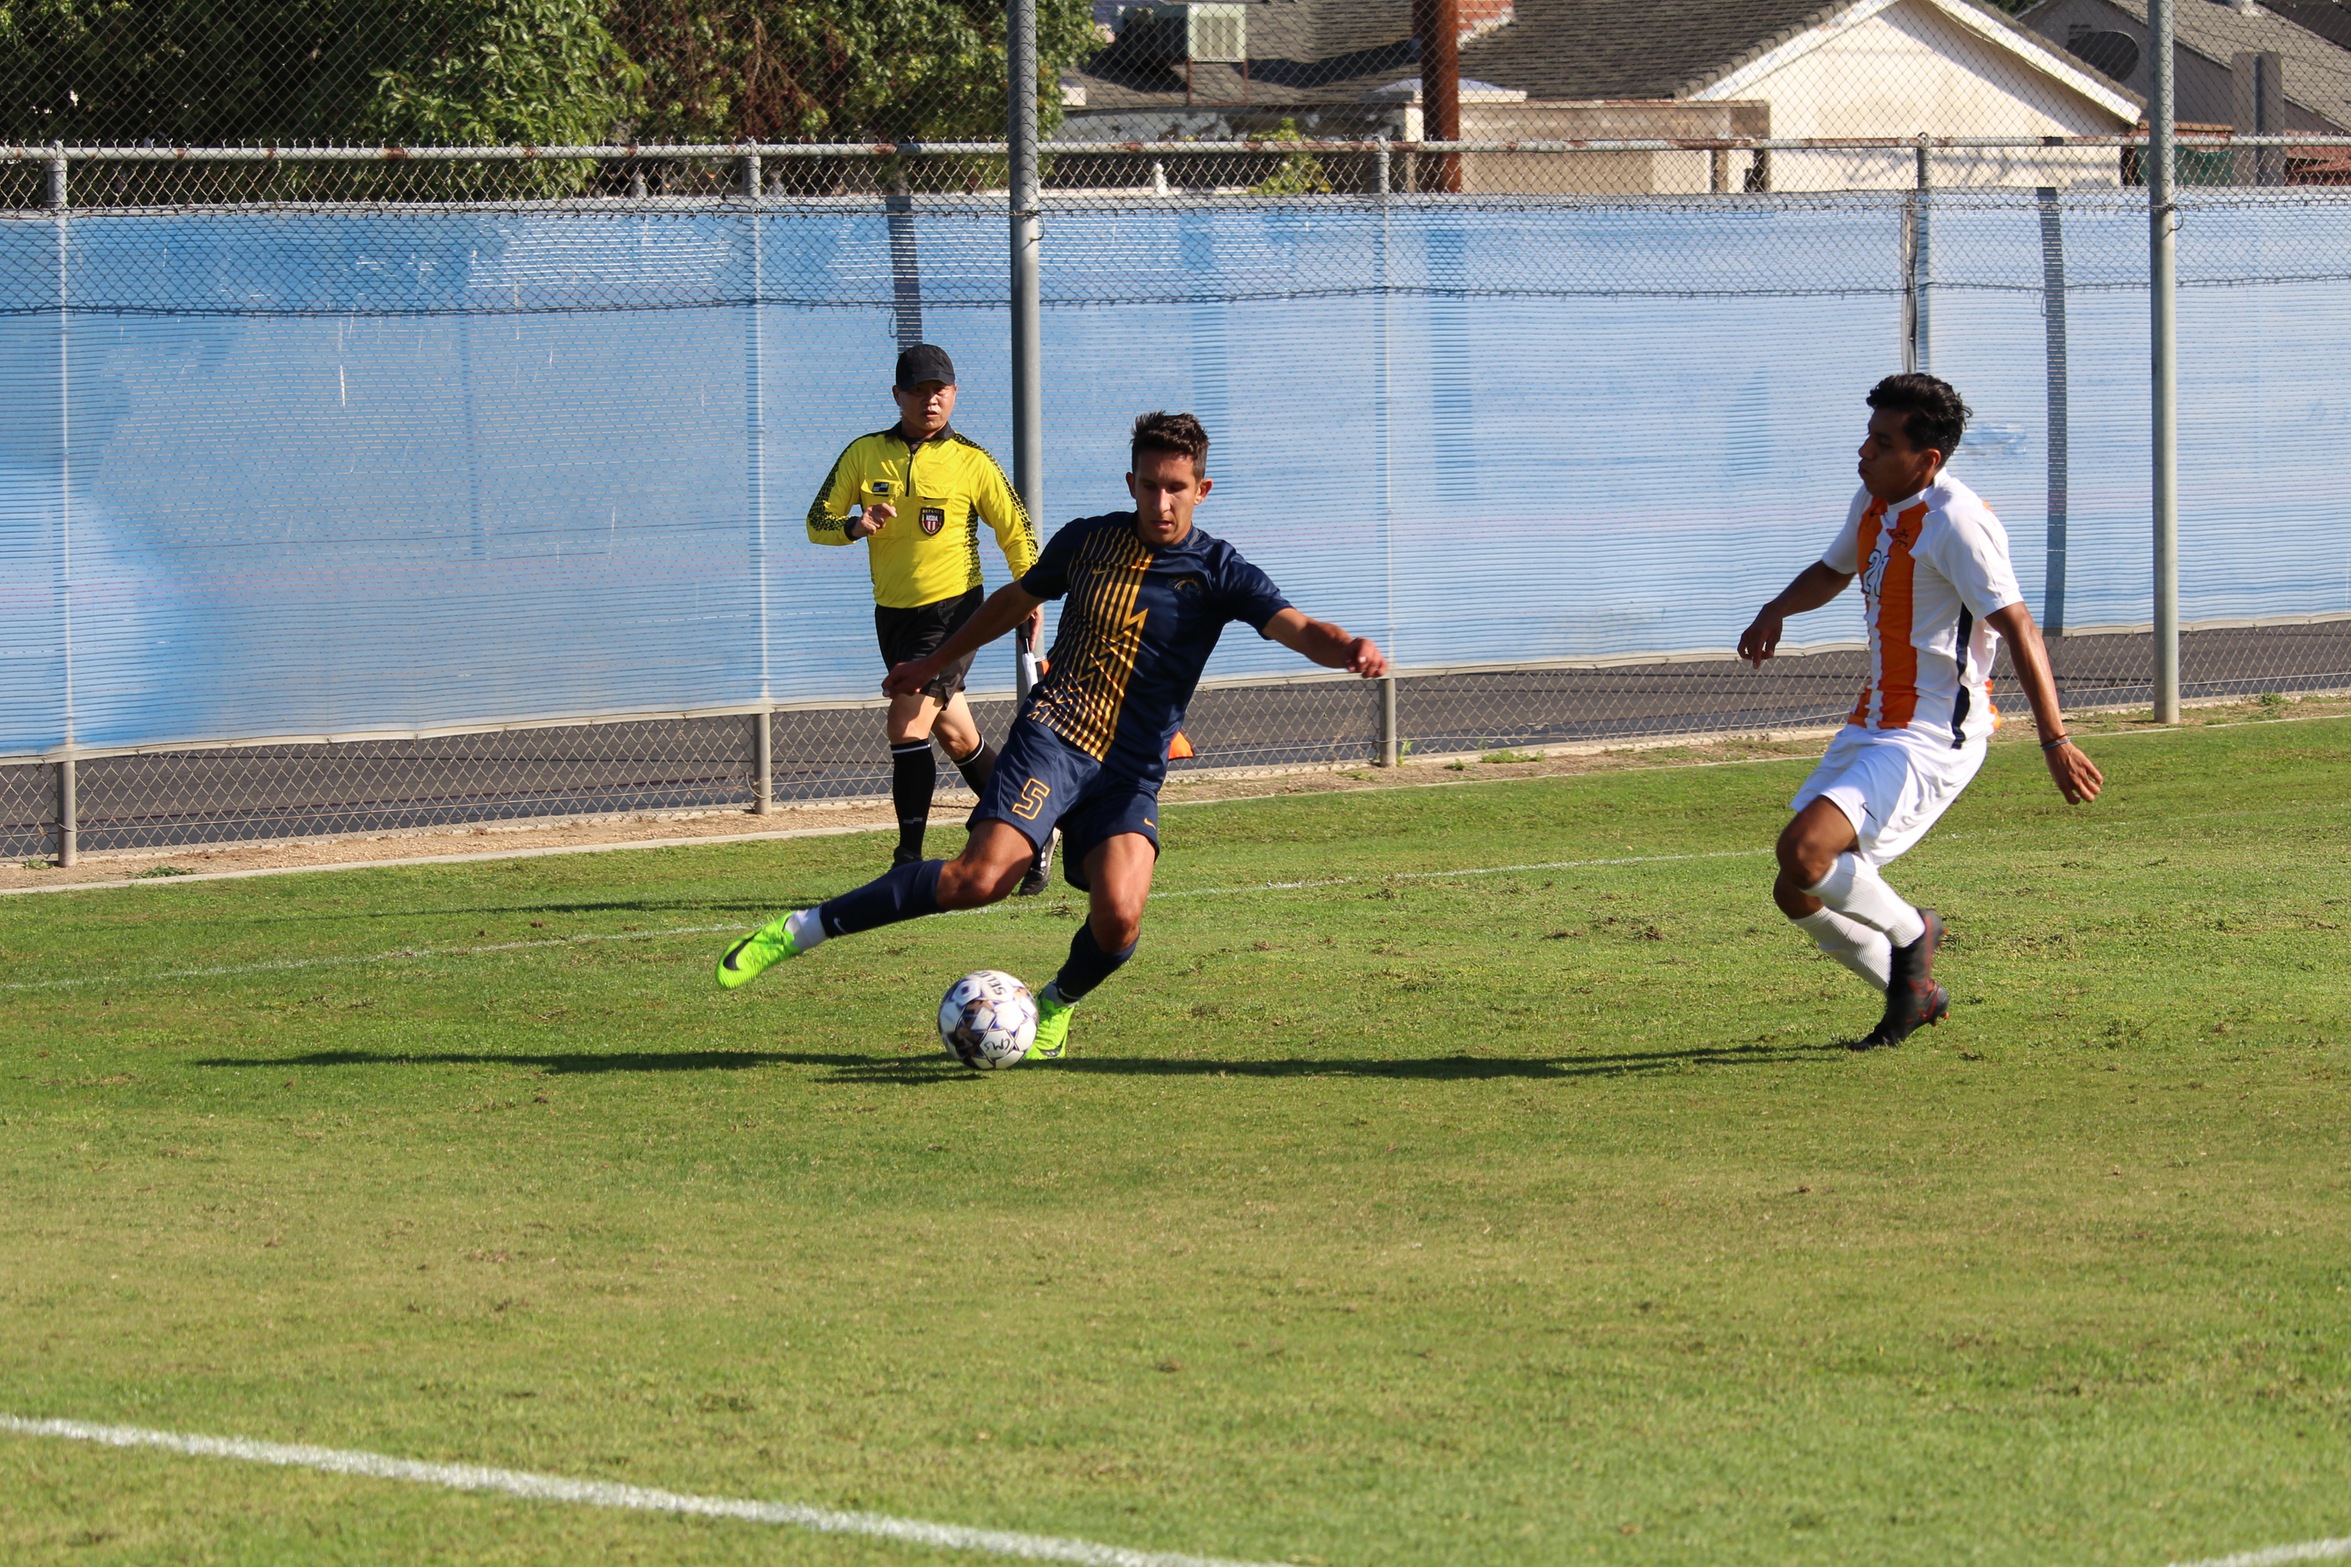 Chargers Bounce Back with 2-0 Win Over Orange Coast